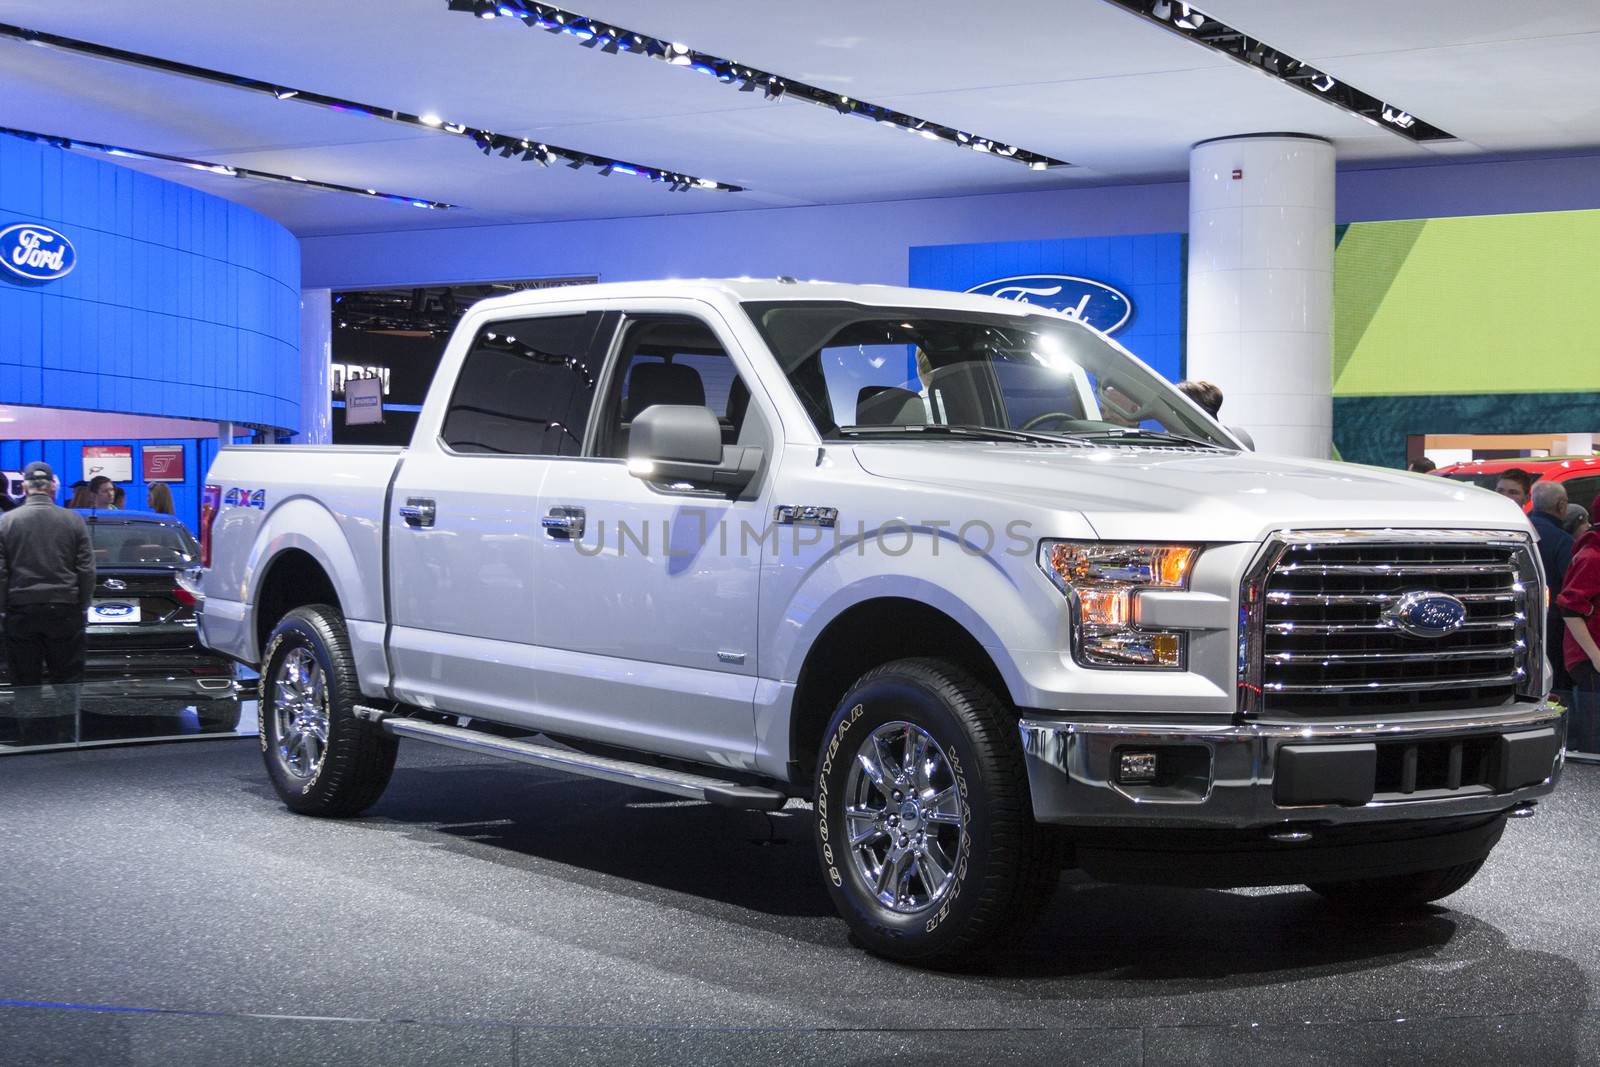 DETROIT - JANUARY 26 :The new 2015 Ford f150 pickup truck at The by snokid